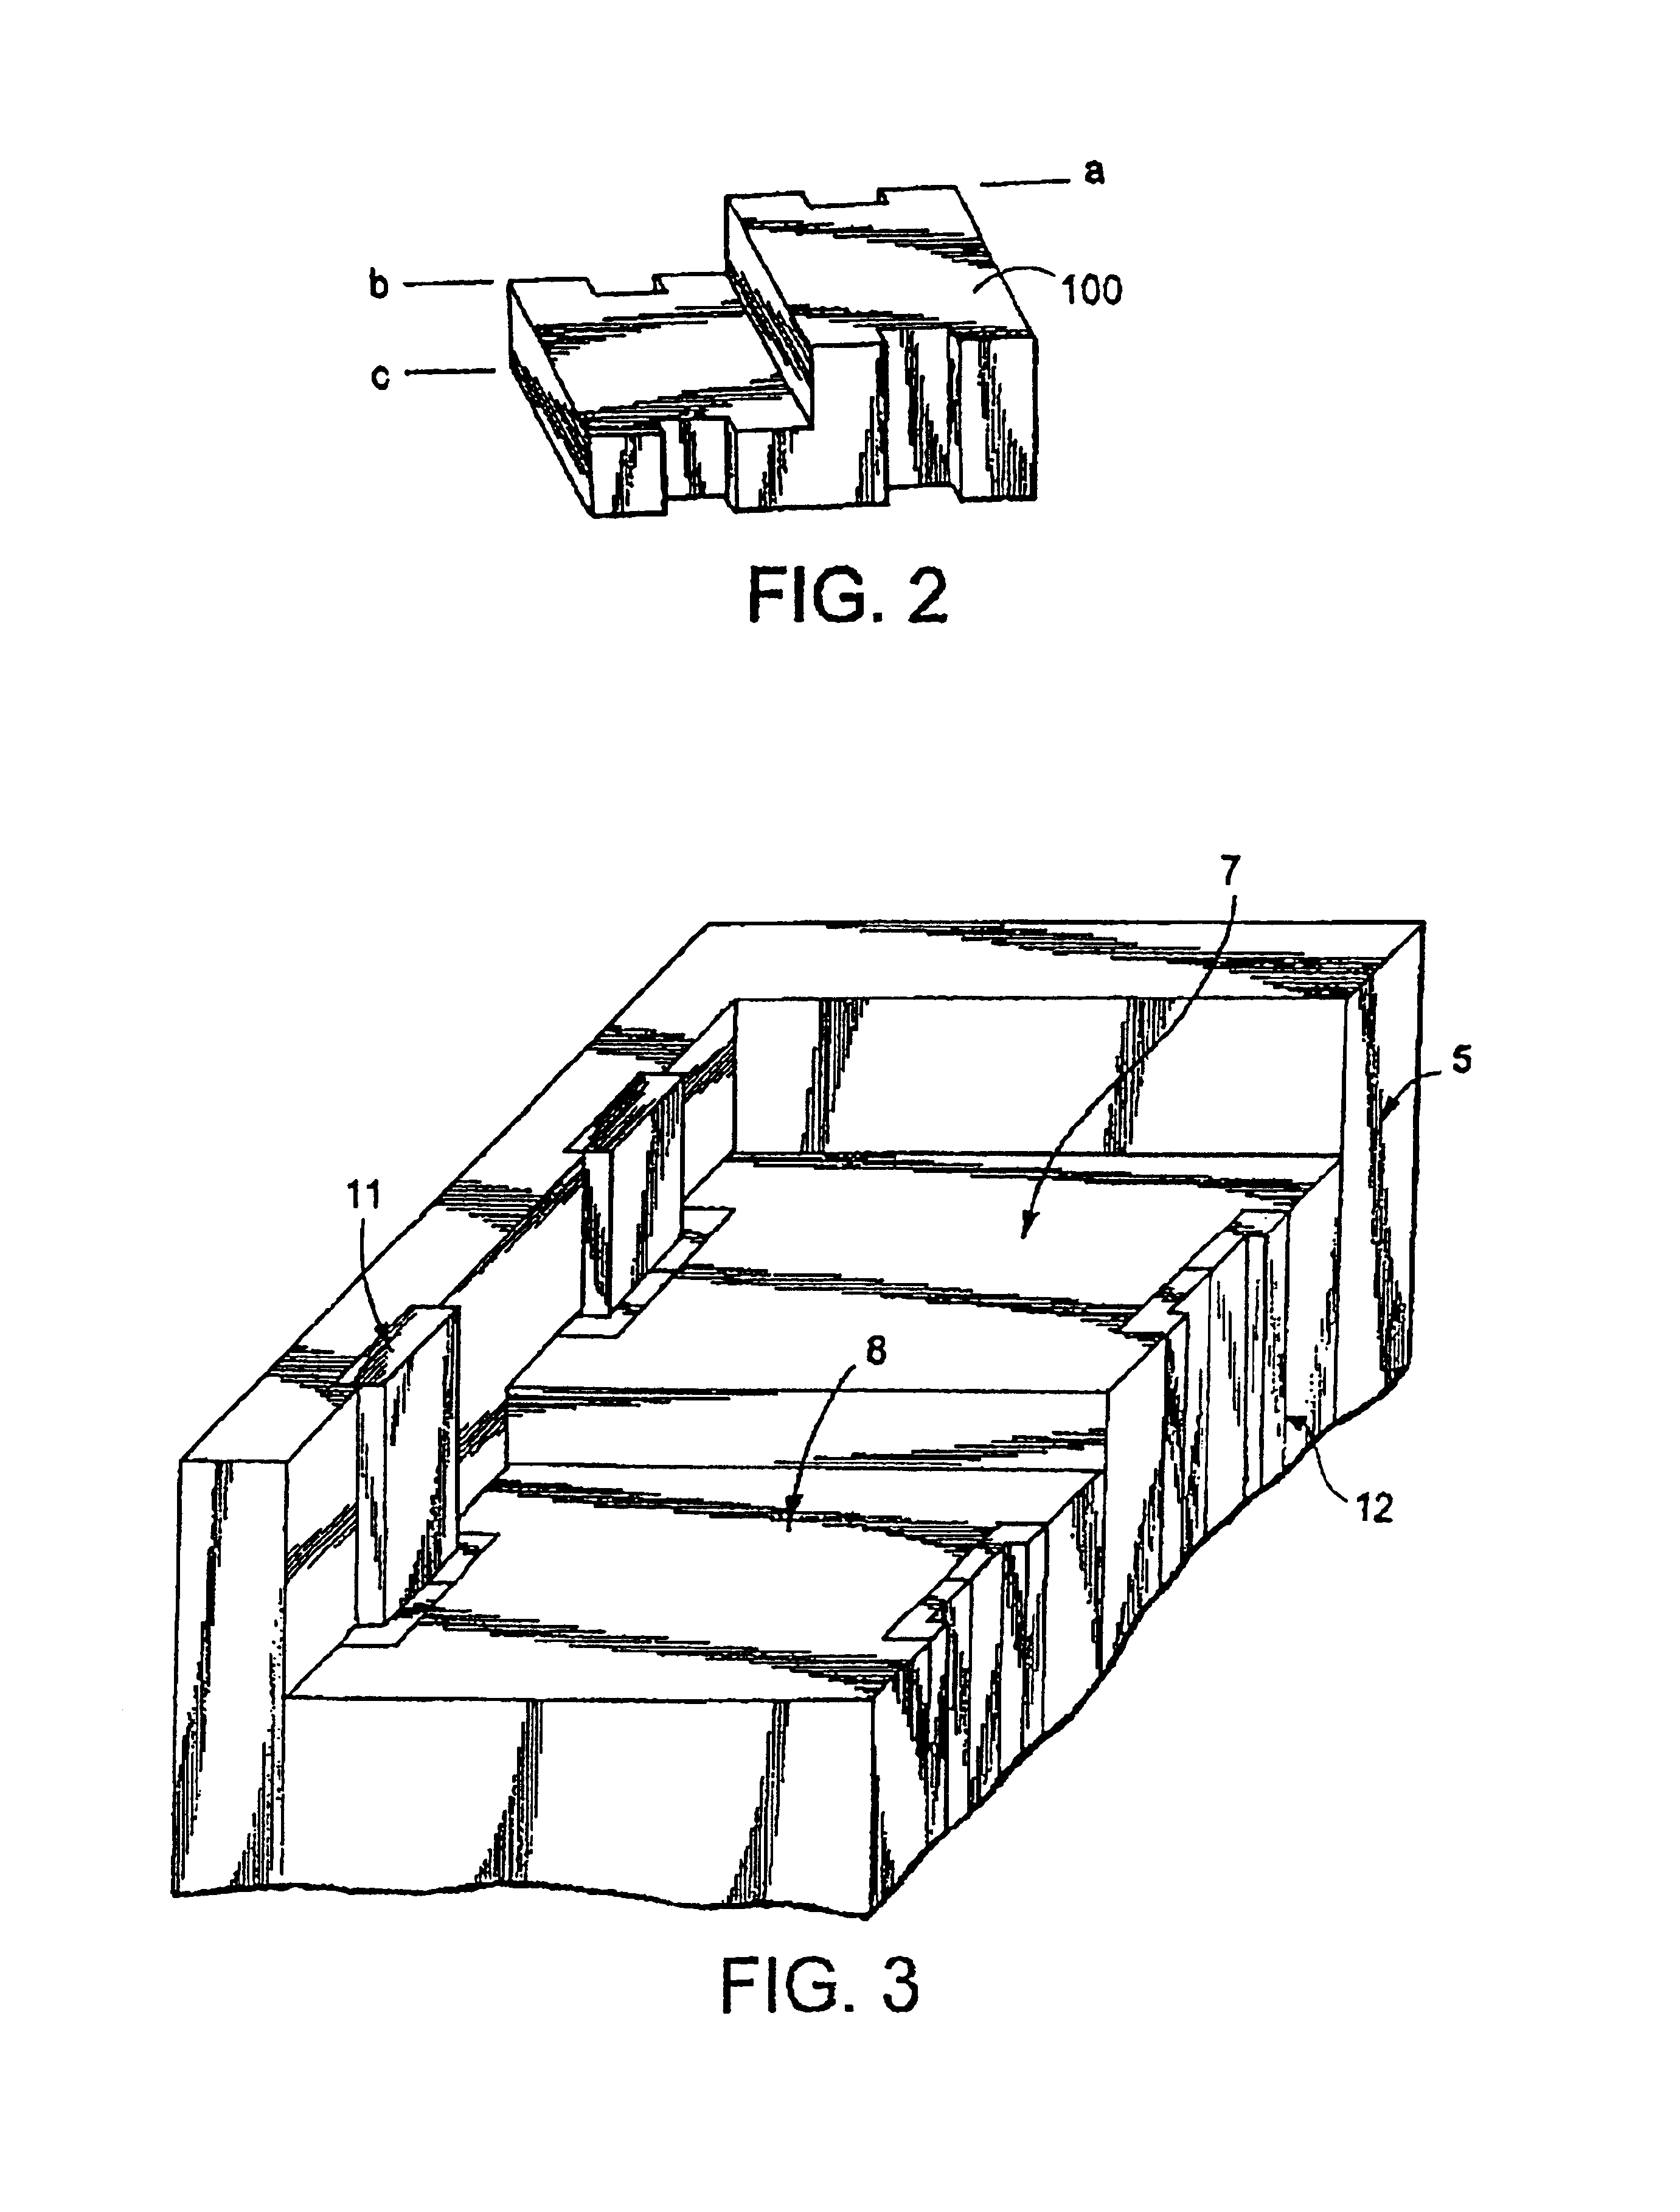 Method and apparatus for producing non-planar formed parts using compaction molding compounds, and parts formed using same